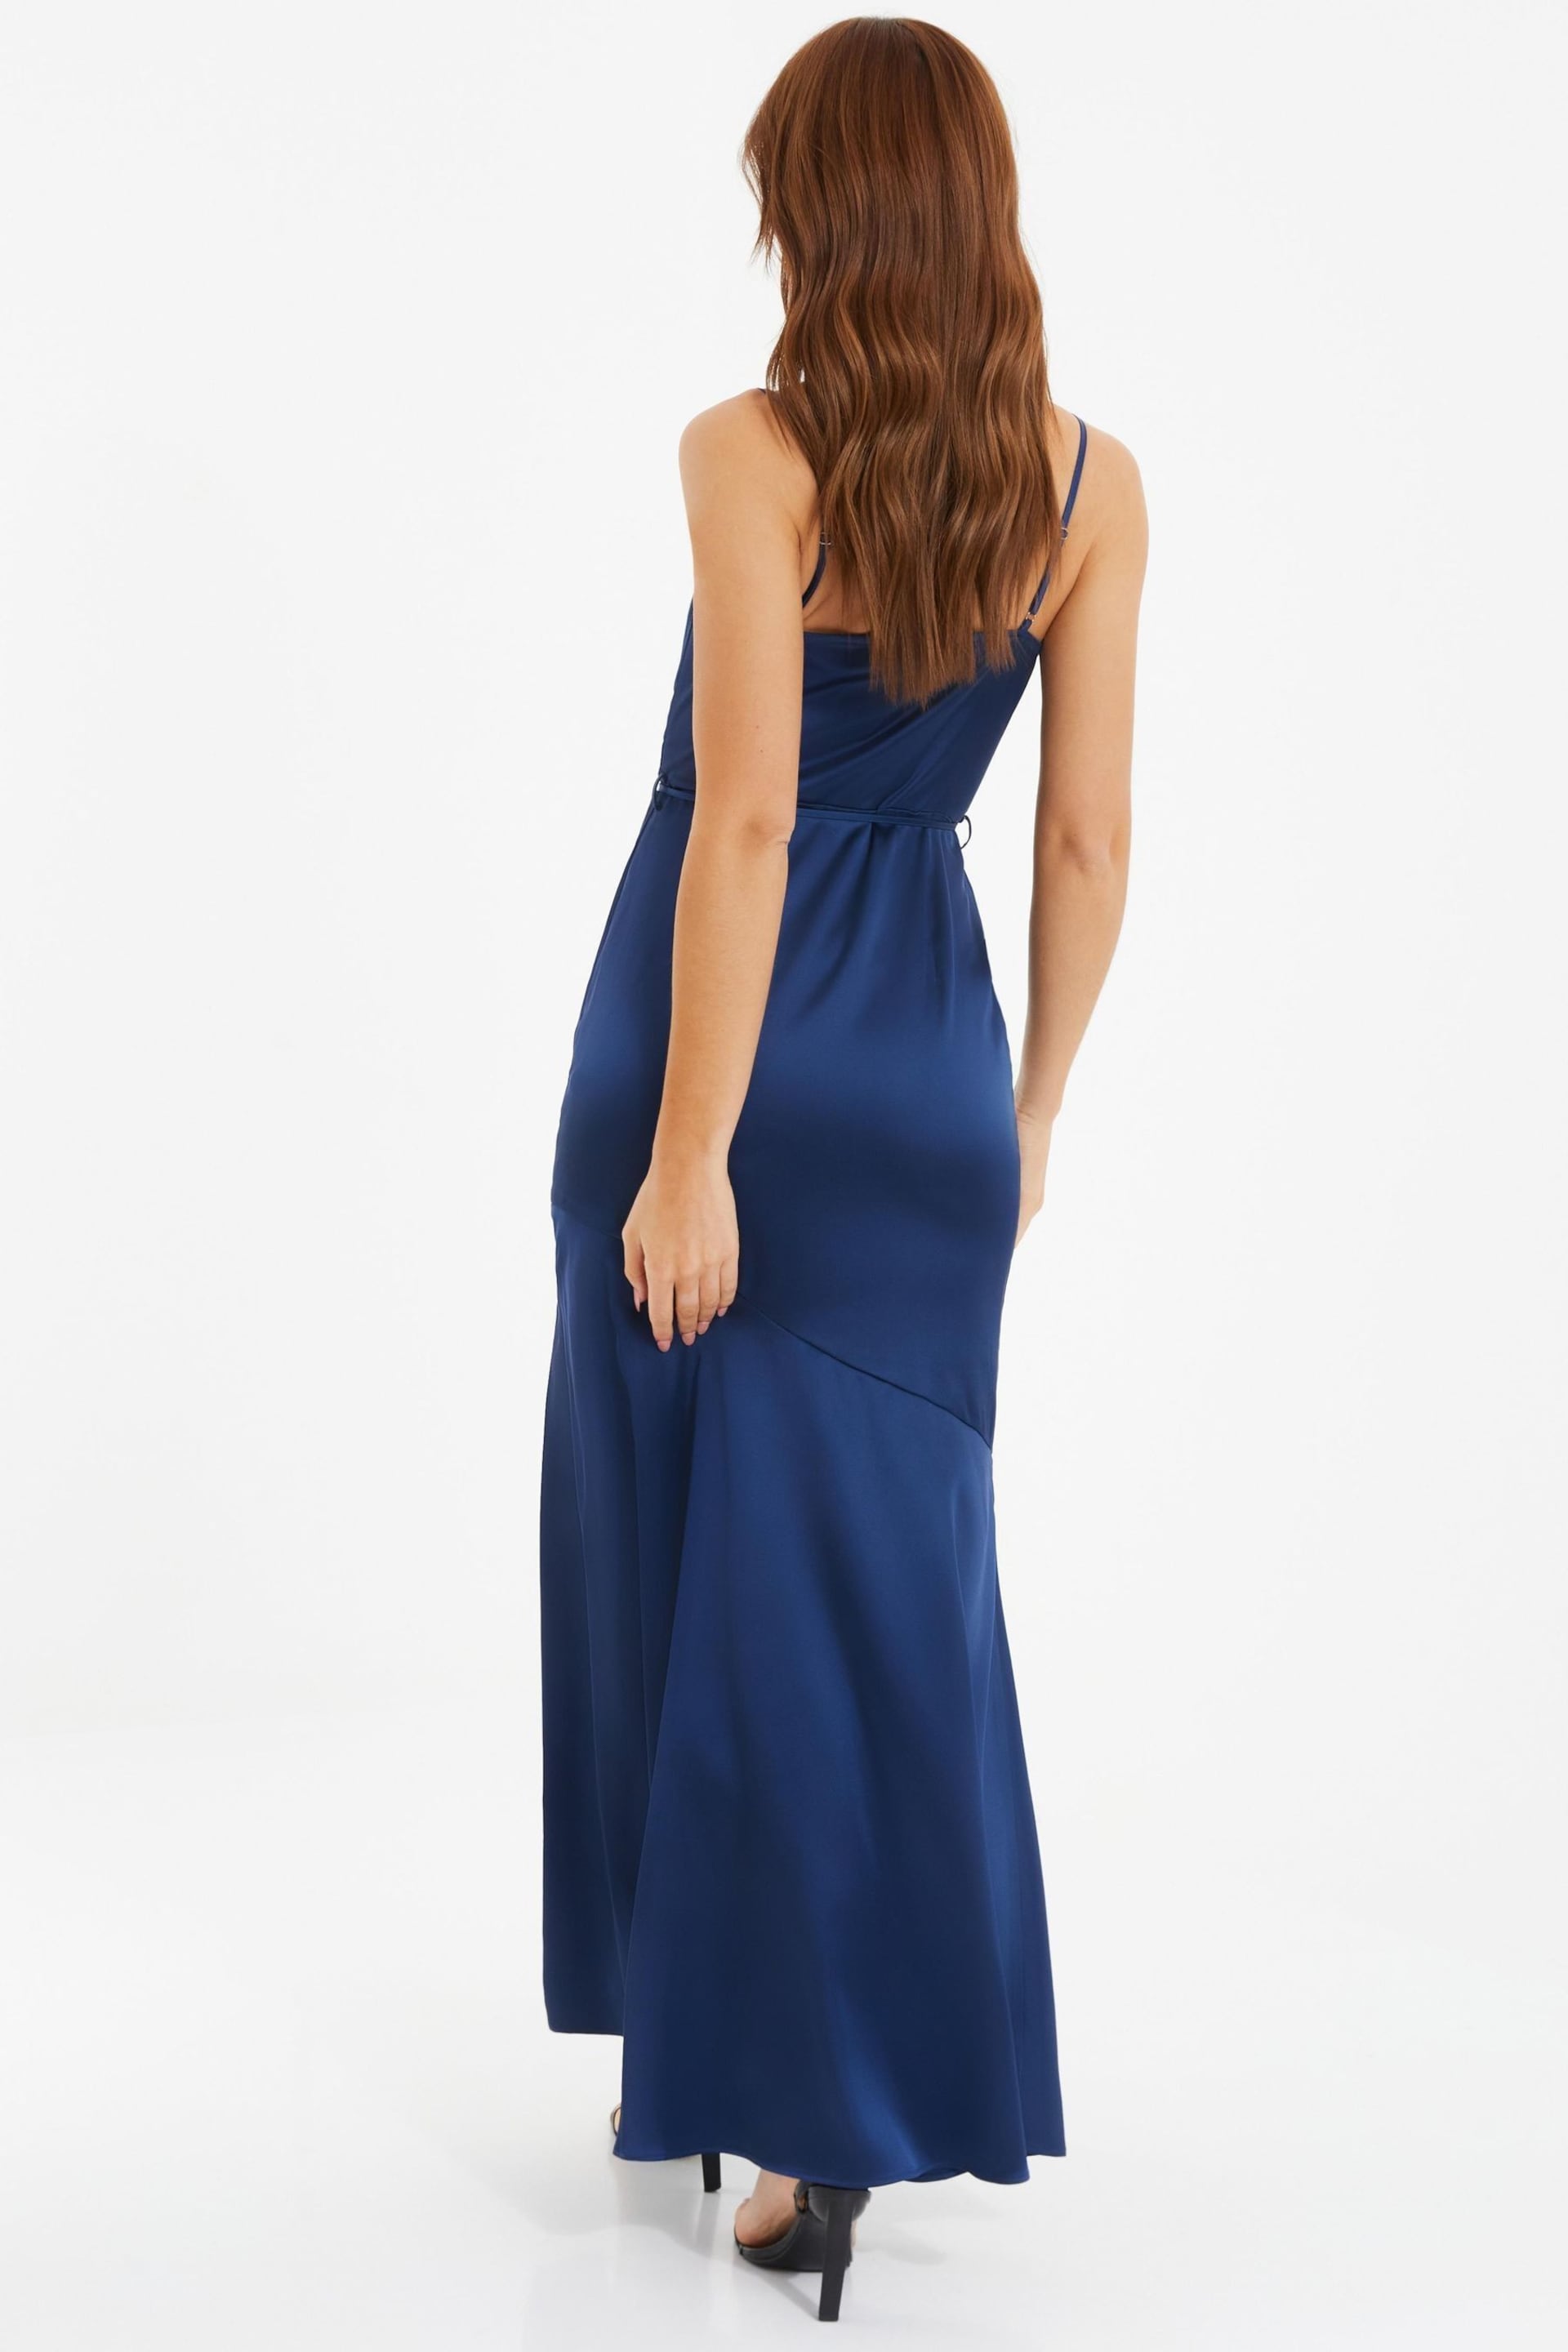 Quiz Blue Satin Bridesmaid Maxi Dress with Tie Waist and Slit - Image 4 of 6